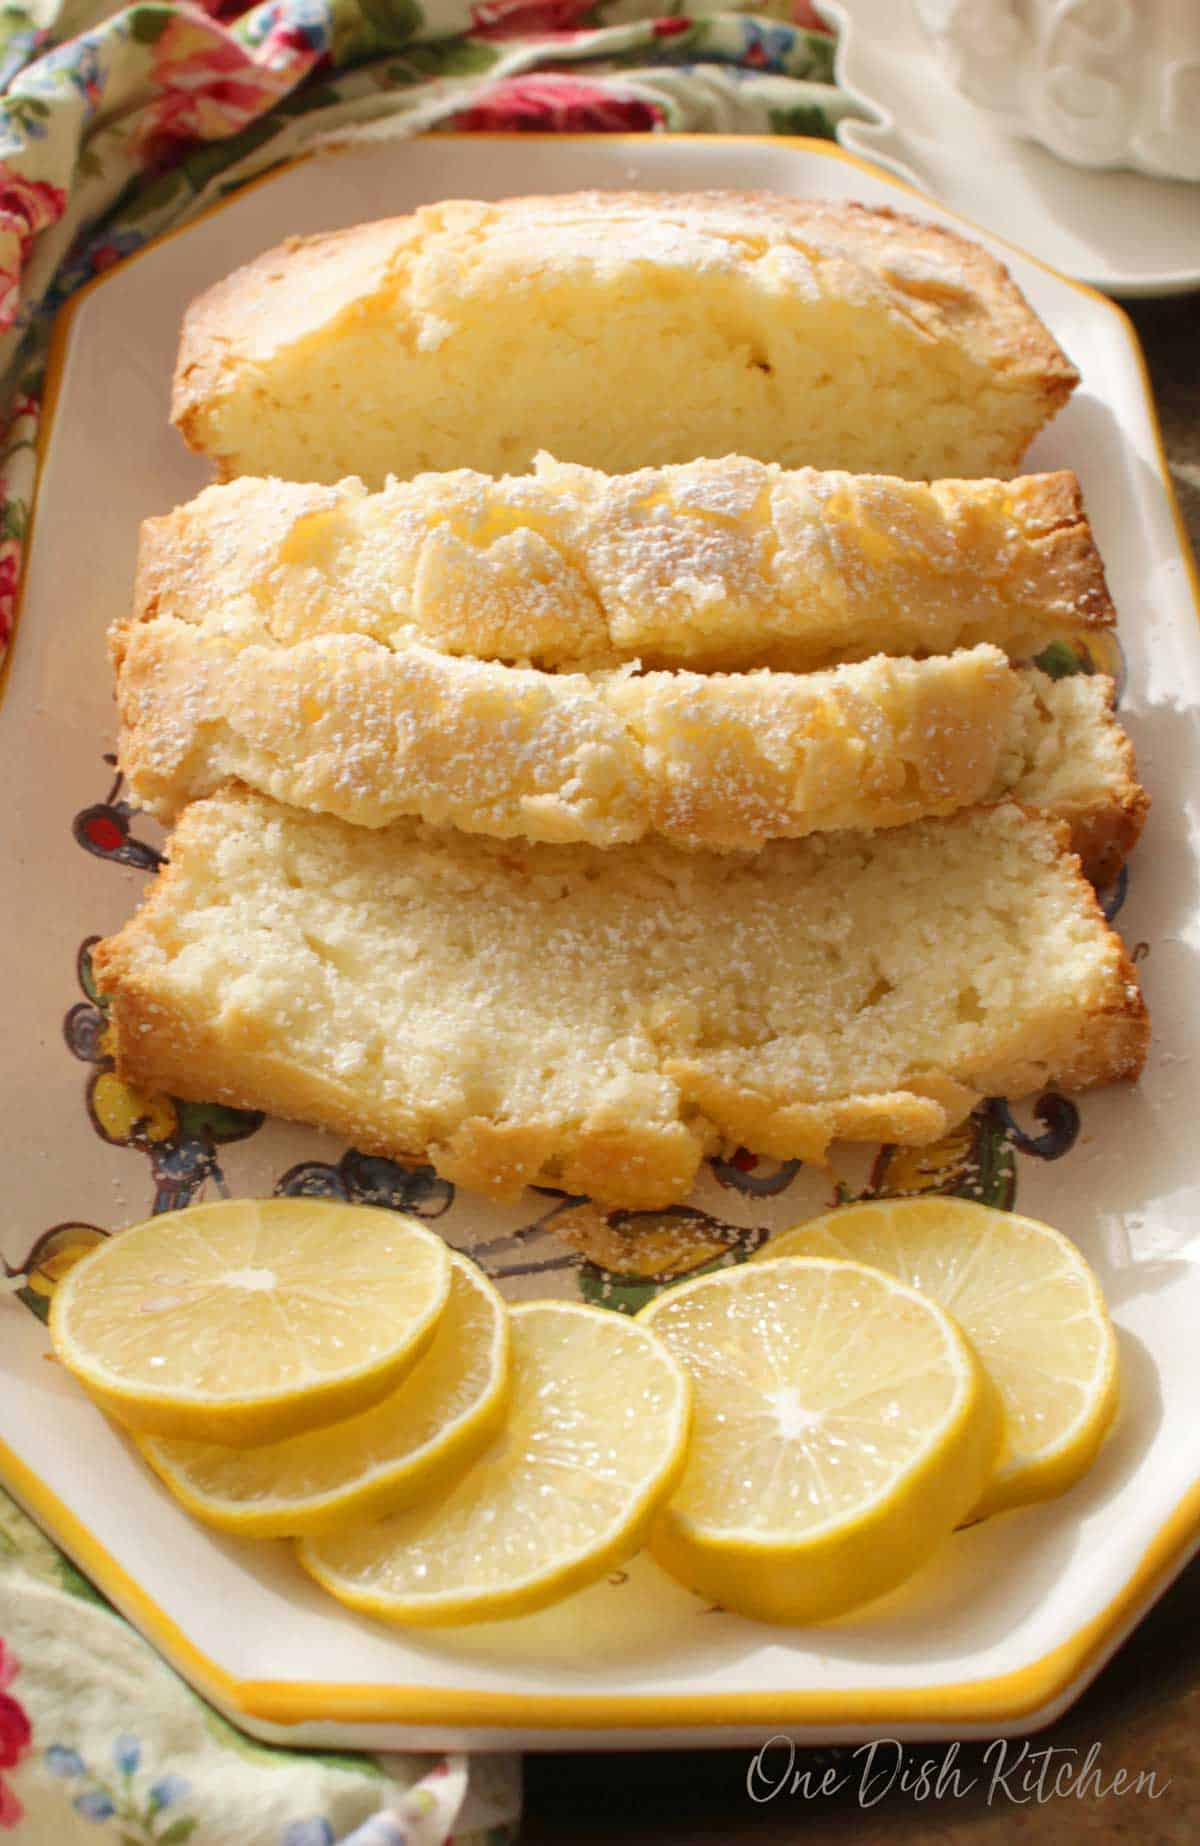 Four slices of pound cake dusted with powdered sugar on a plate with five decorative lemon wheels.